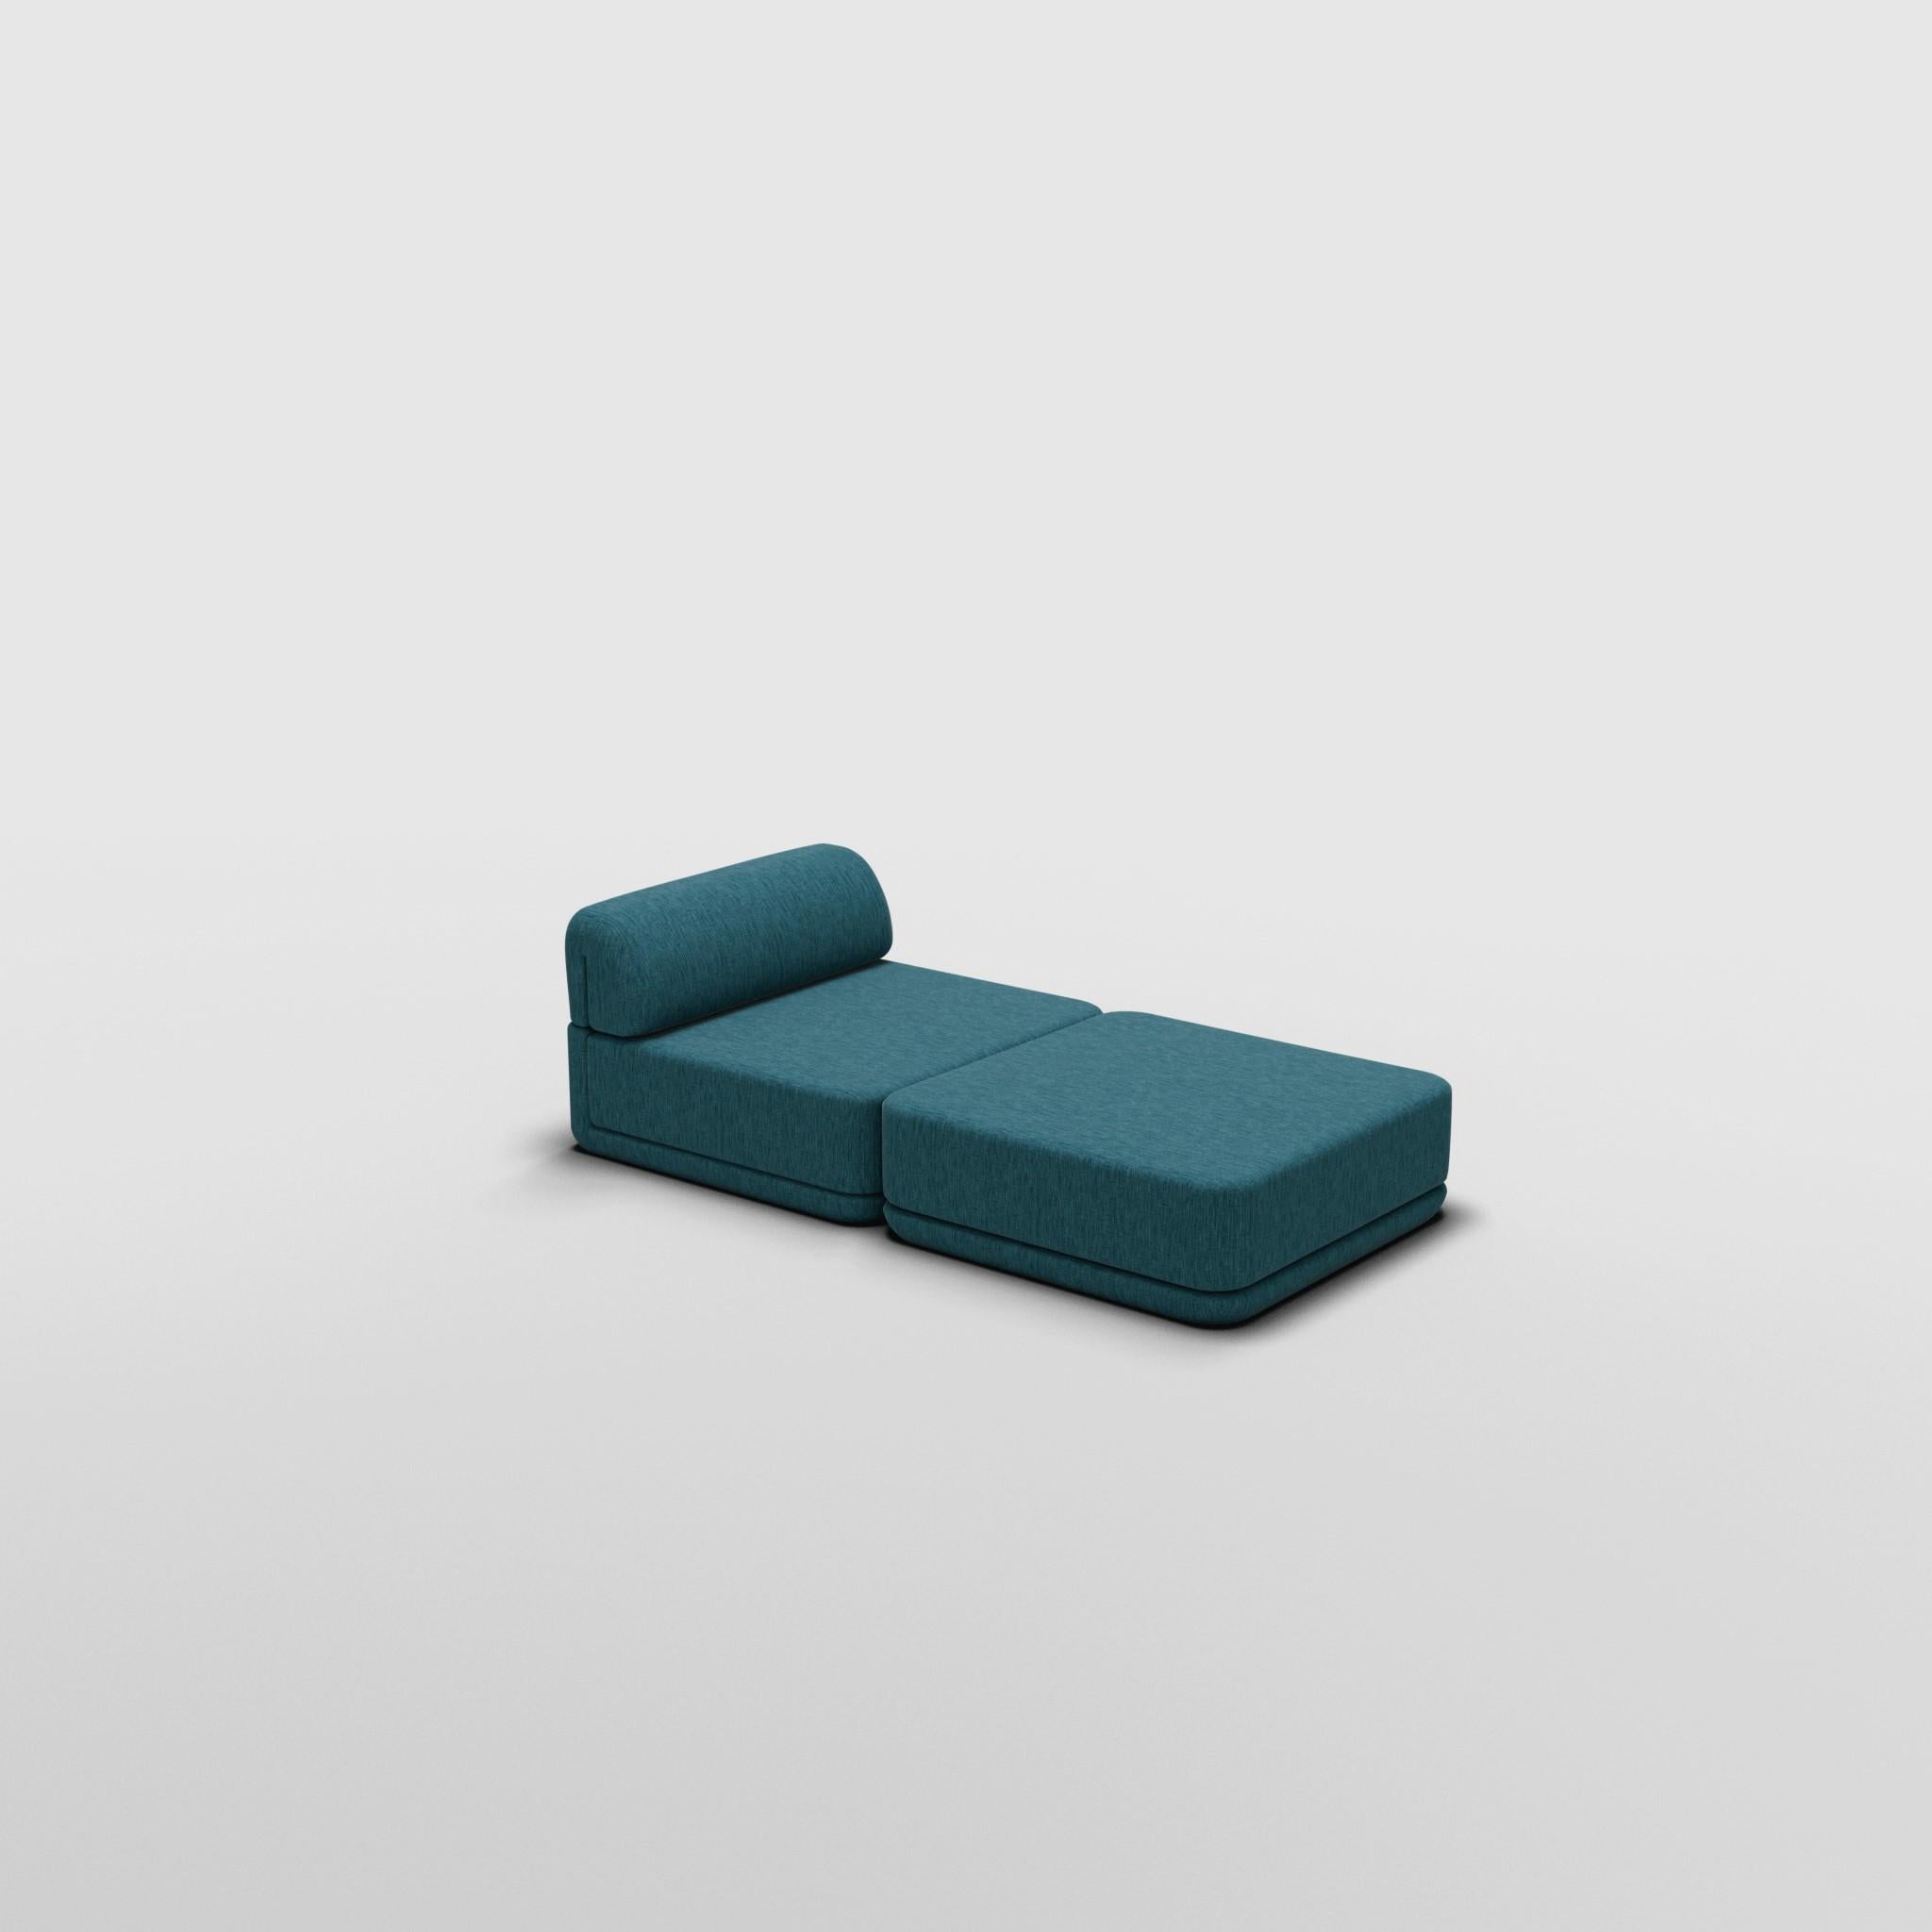 Lounge + Ottoman Set - Inspired by 70s Italian Luxury Furniture

Discover The Cube Sofa, where art meets adaptability. Its sculptural design and customizable comfort create endless possibilities for your living space. Make a statement, elevate your